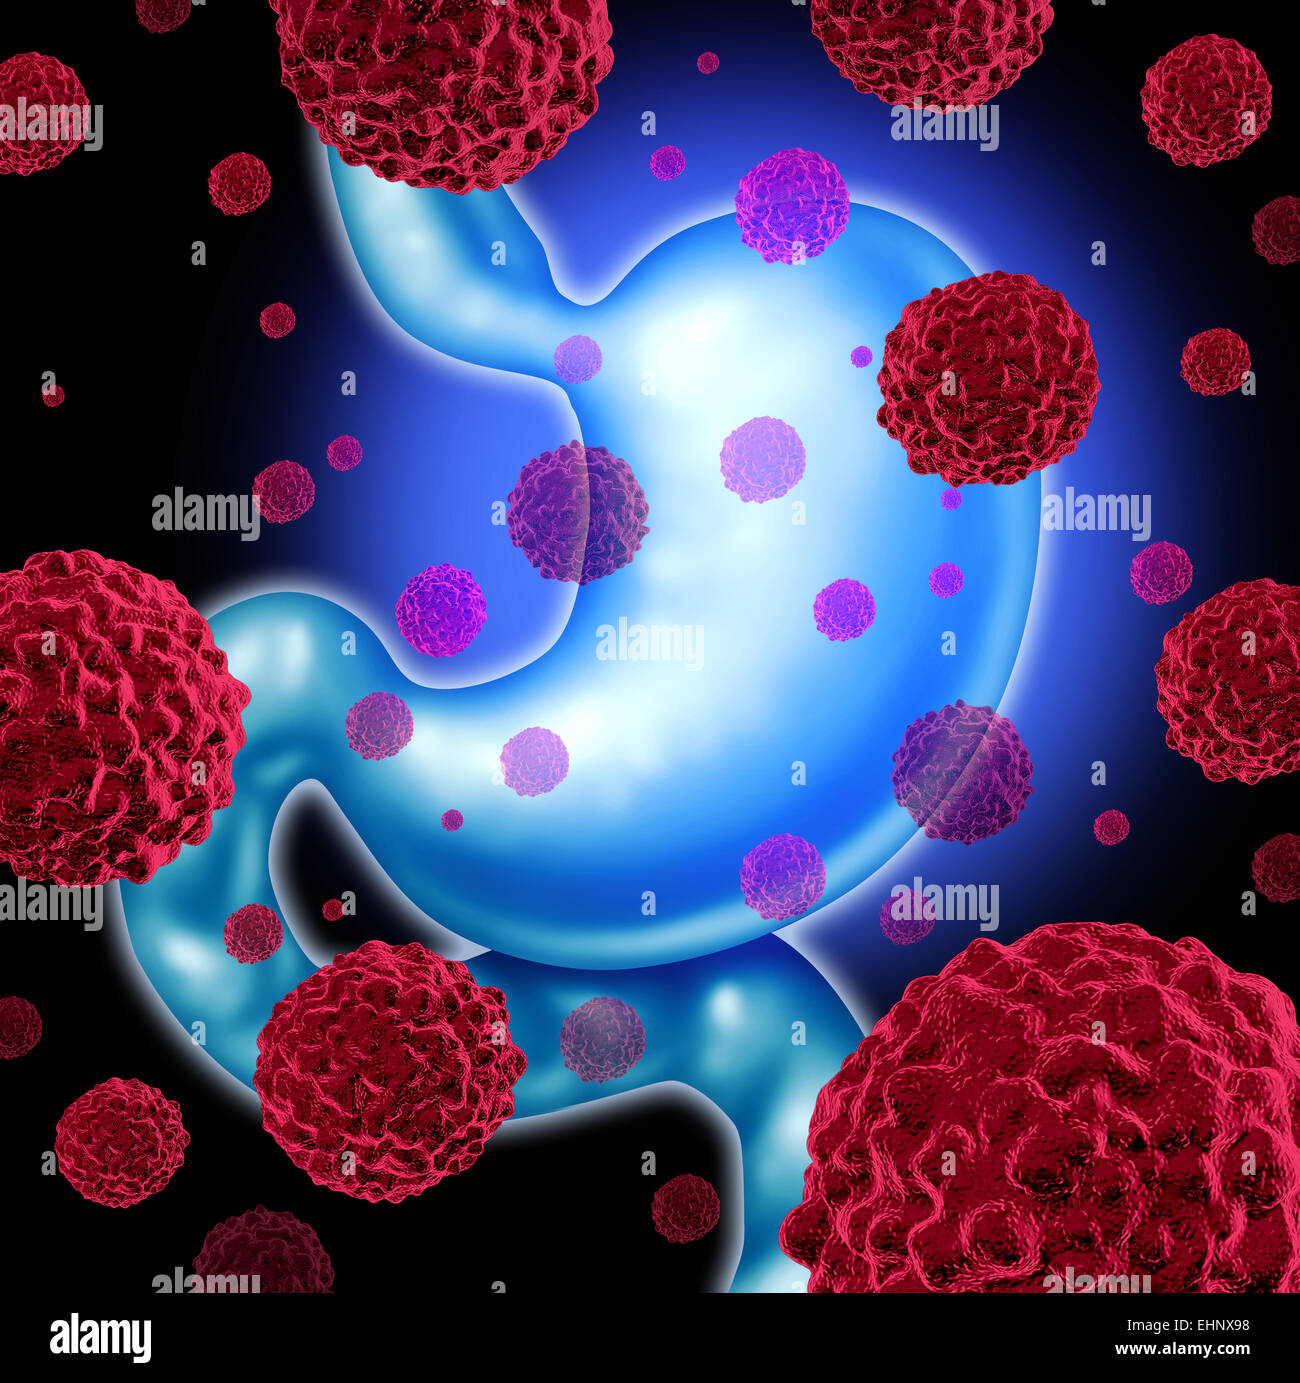 Stomach cancer concept and digestive health care disease symbol featuring the abdominal internal organ with cancerous cells spreading in the human body. Stock Photo